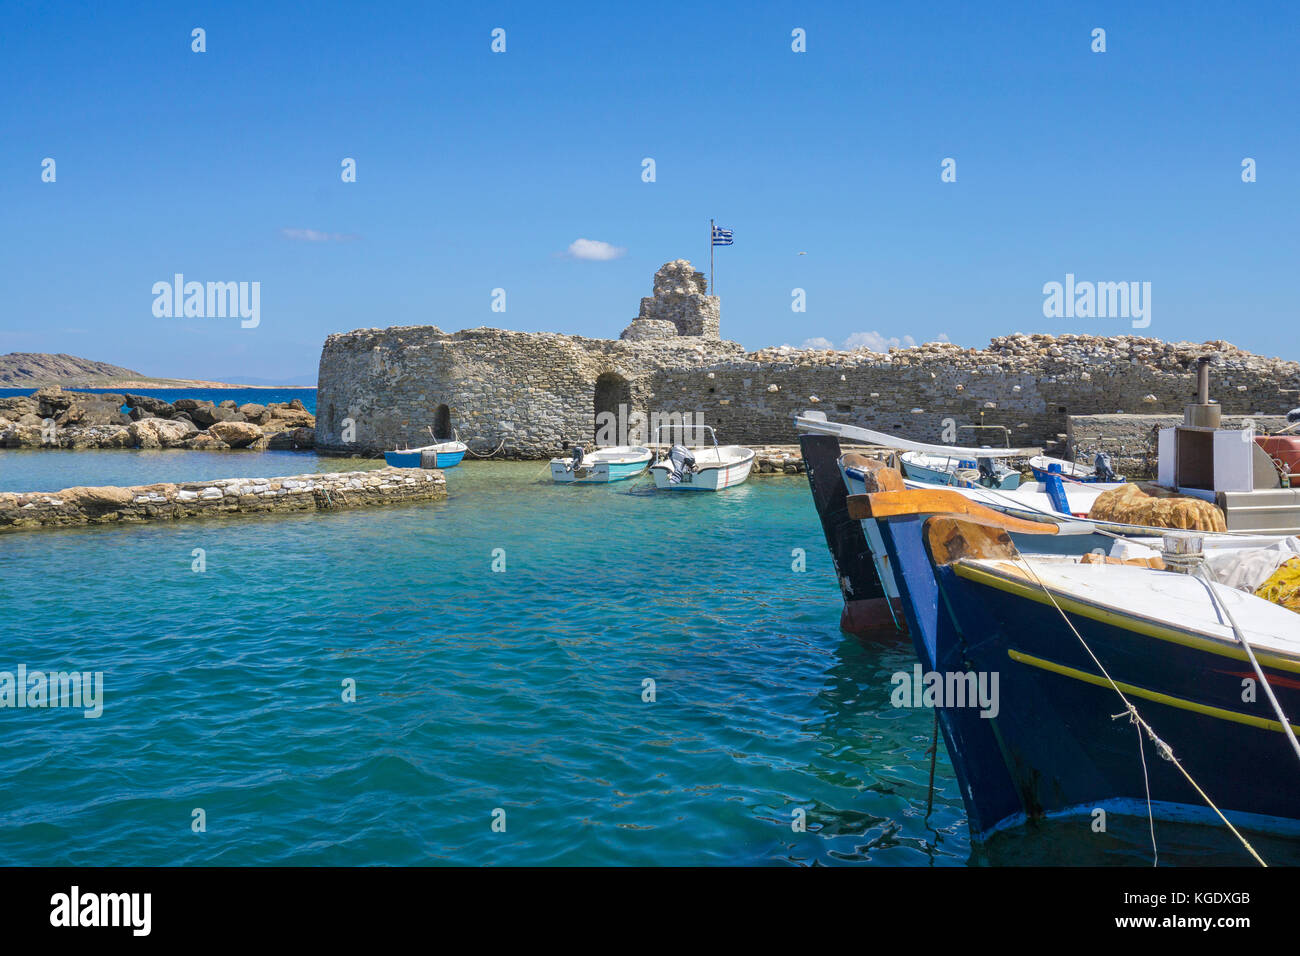 Venetien Fort and boats at harbour of Naoussa, Paros island, Cyclades, Aegean, Greece Stock Photo